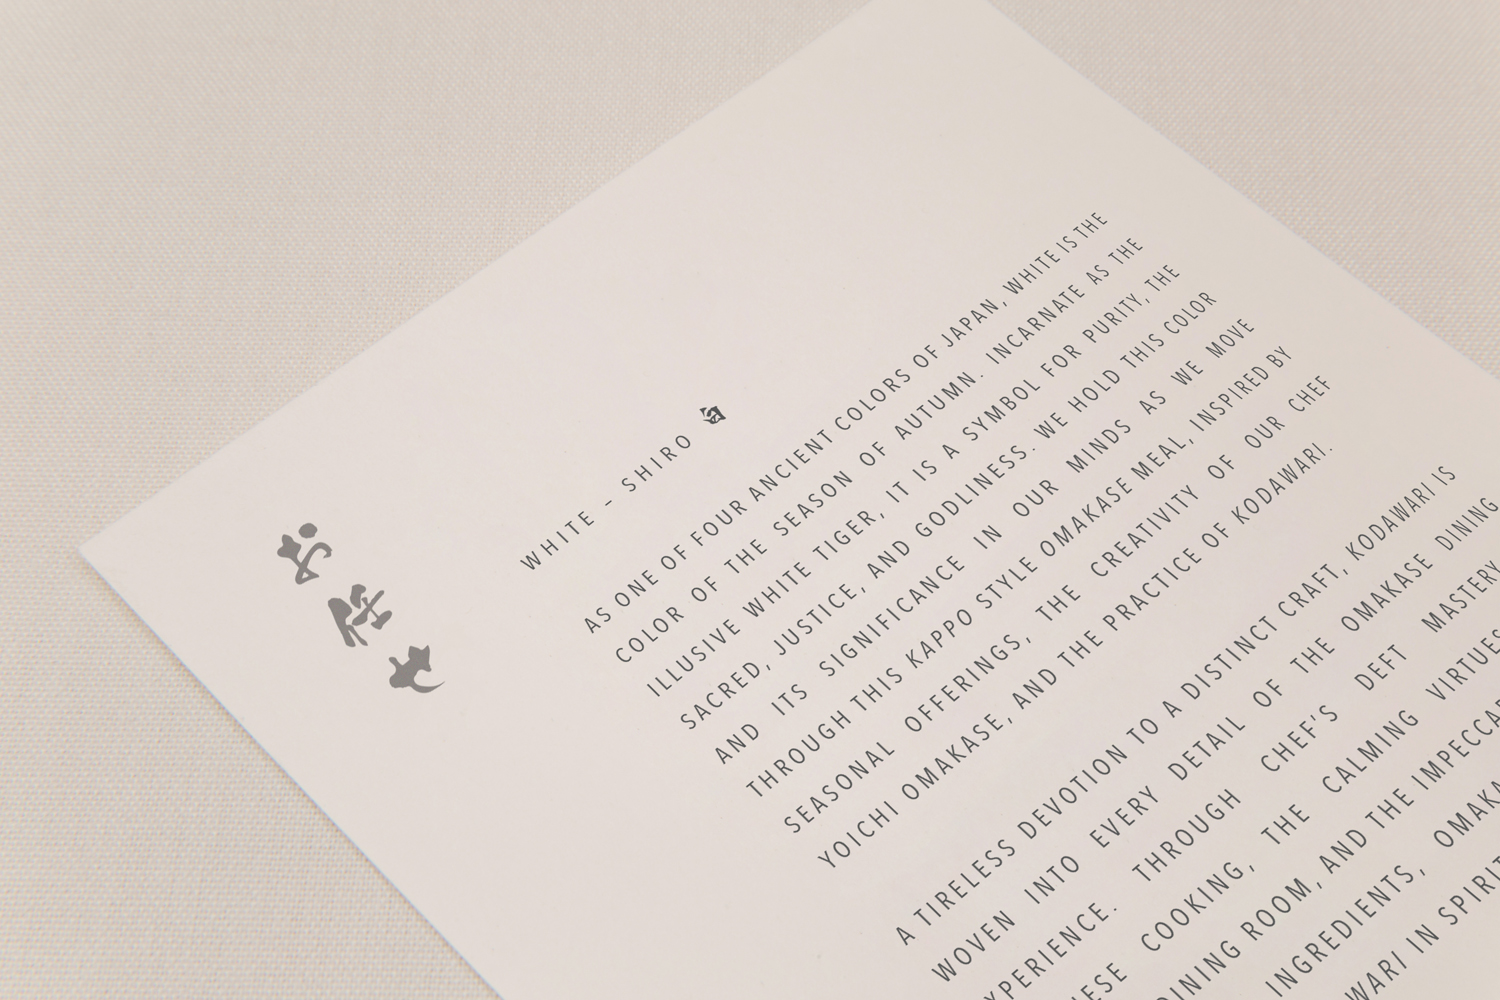 Visual identity and design for print by Savvy for New York restaurant Omakase Room by Tatsu